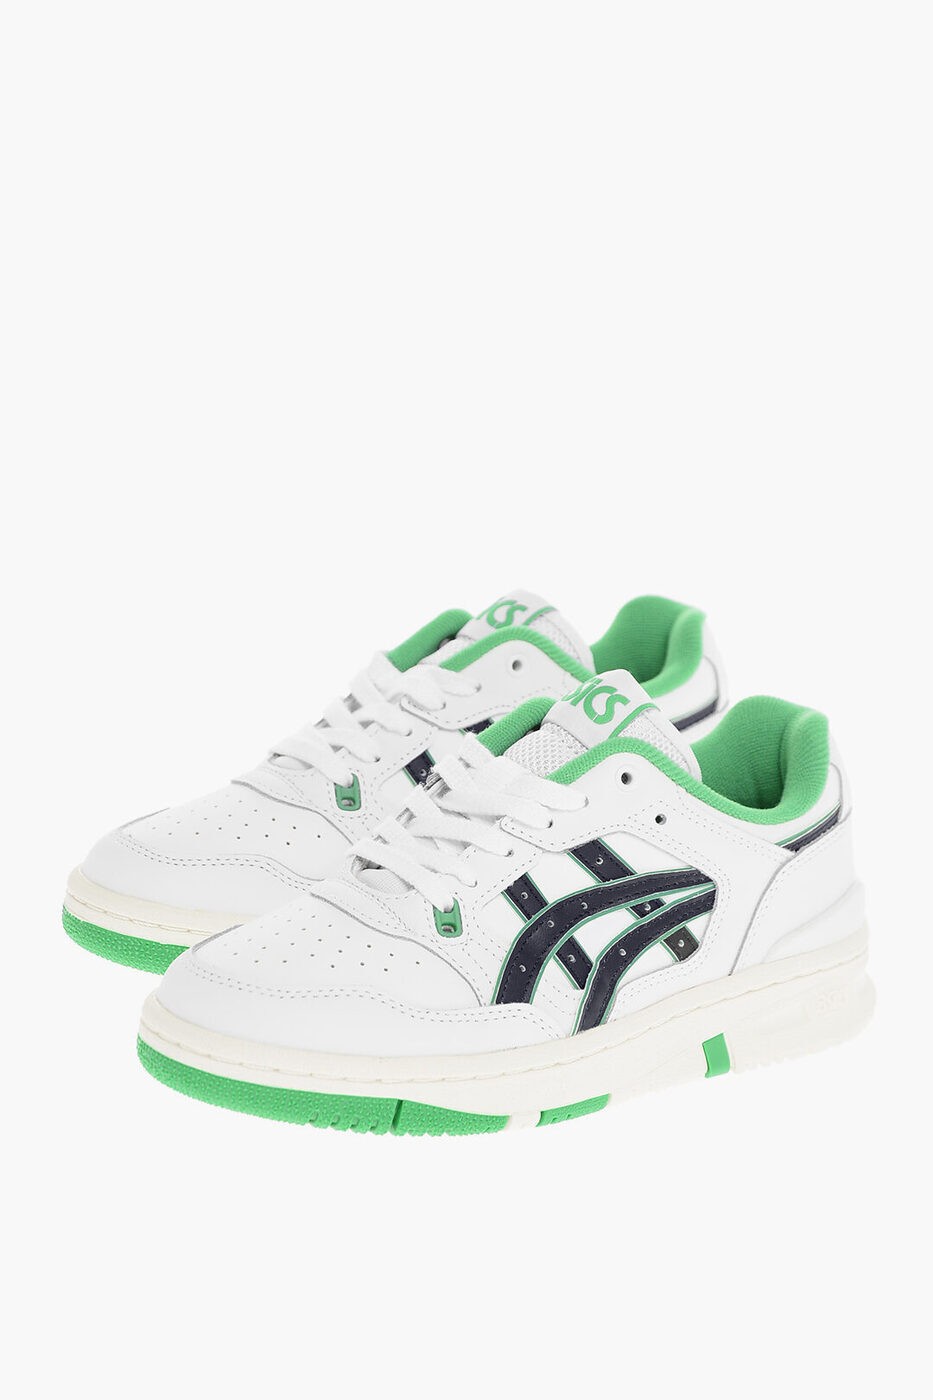 ASICS アシックス スニーカー 1201A476-LE 106 レディース CONTRASTING LOGO LOW-TOP LEATHER SNEAKERS 【関税・送料無料】【ラッピング無料】 dk